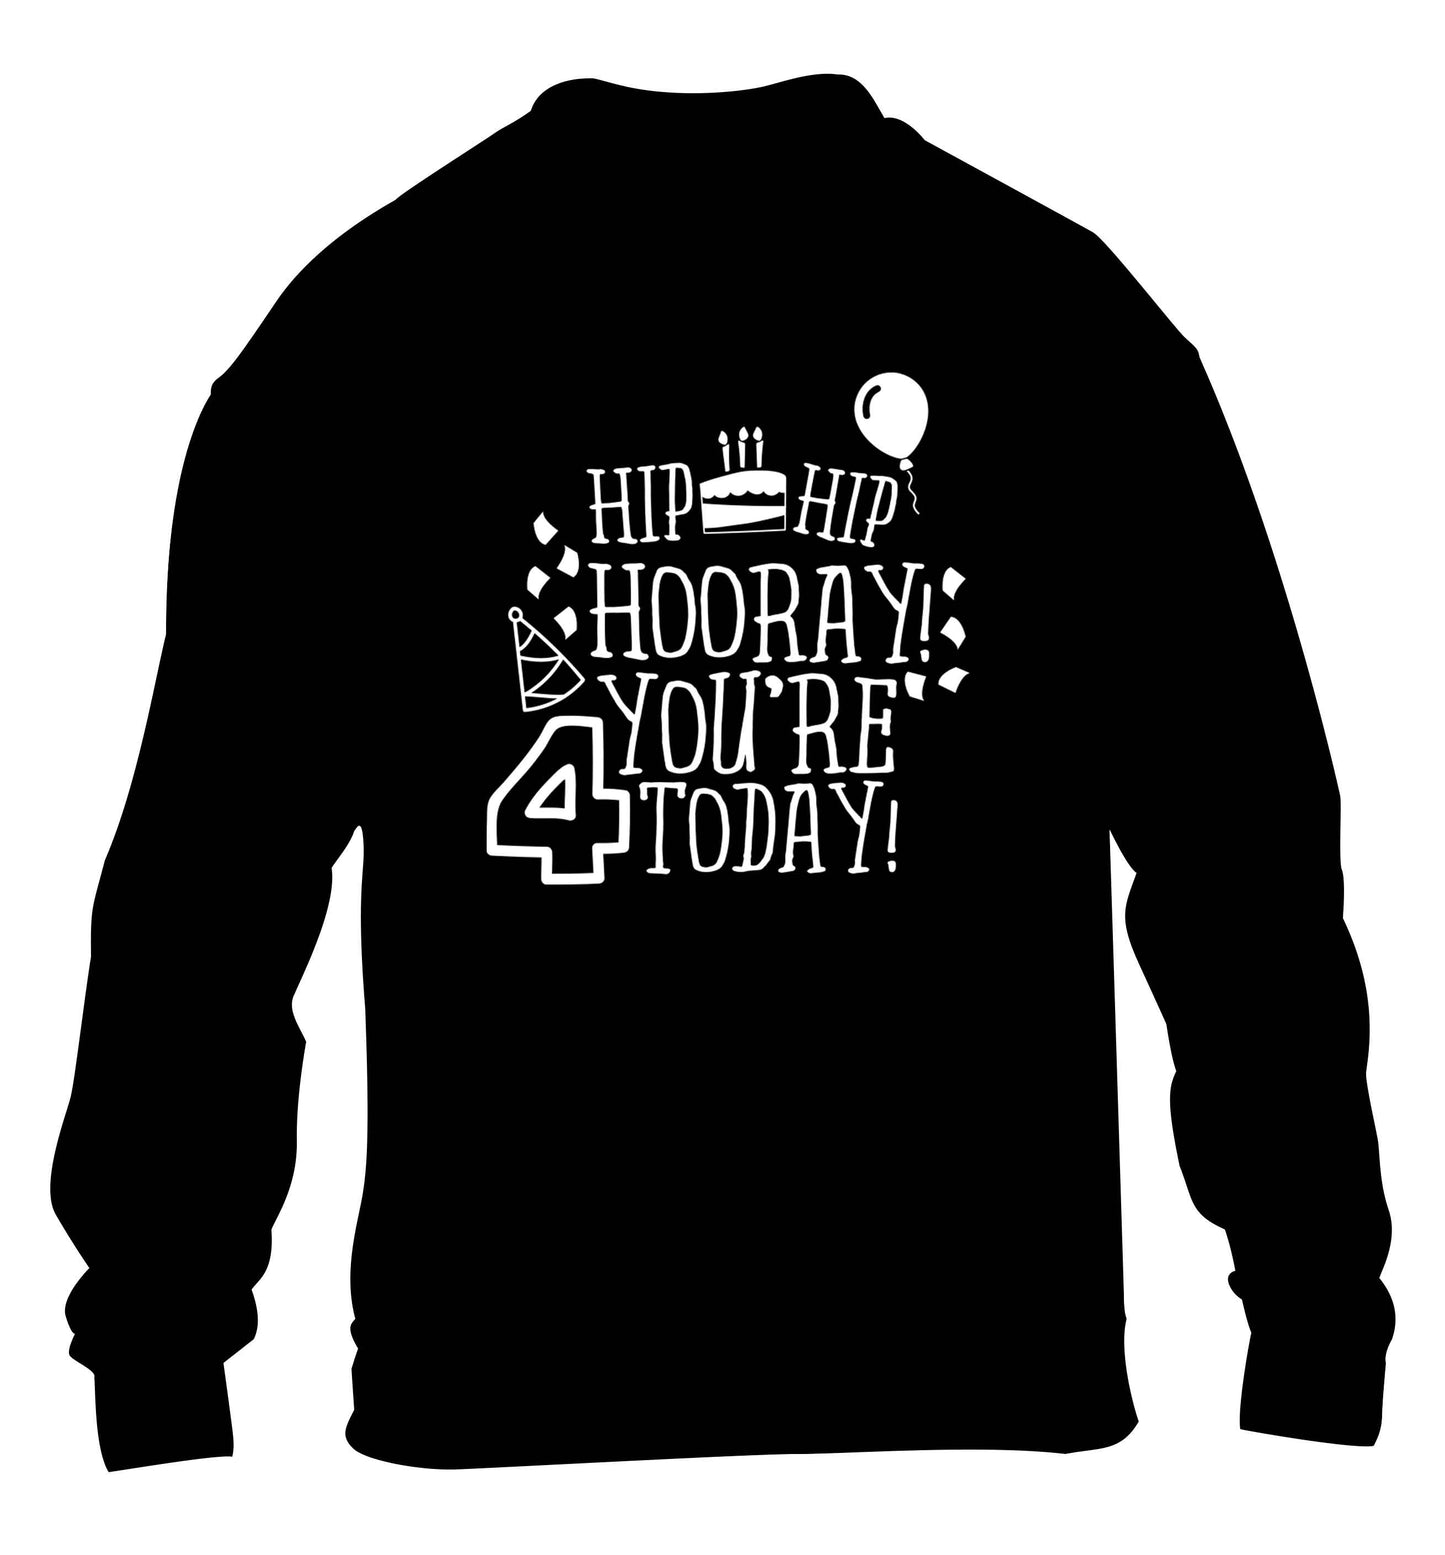 Hip hip hooray you're four today!children's black sweater 12-13 Years